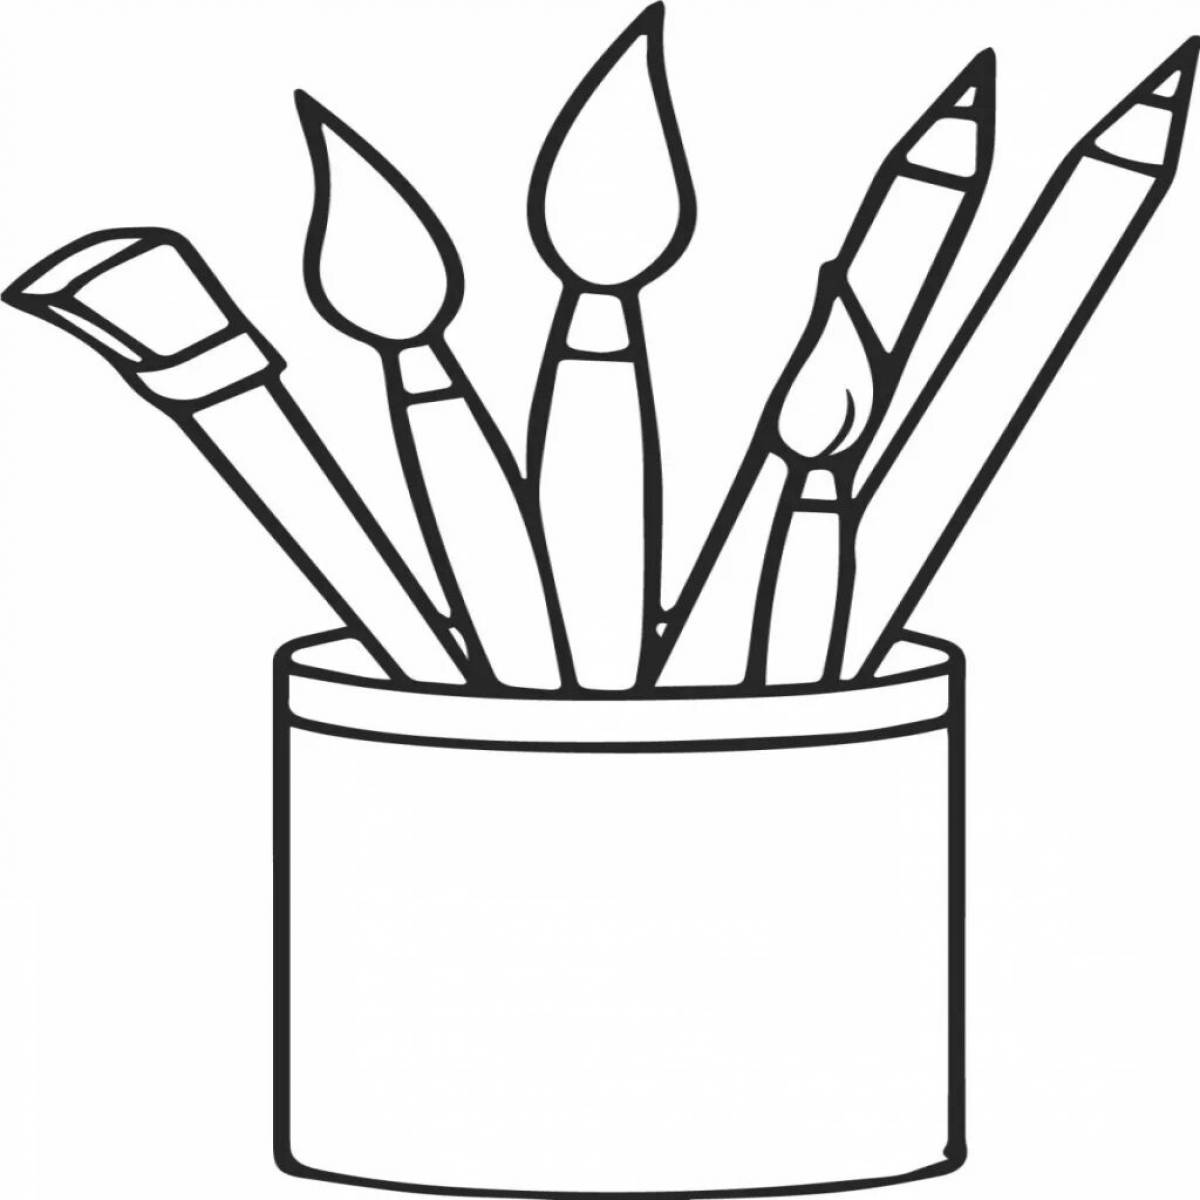 Color illustrated coloring page of paints and brushes